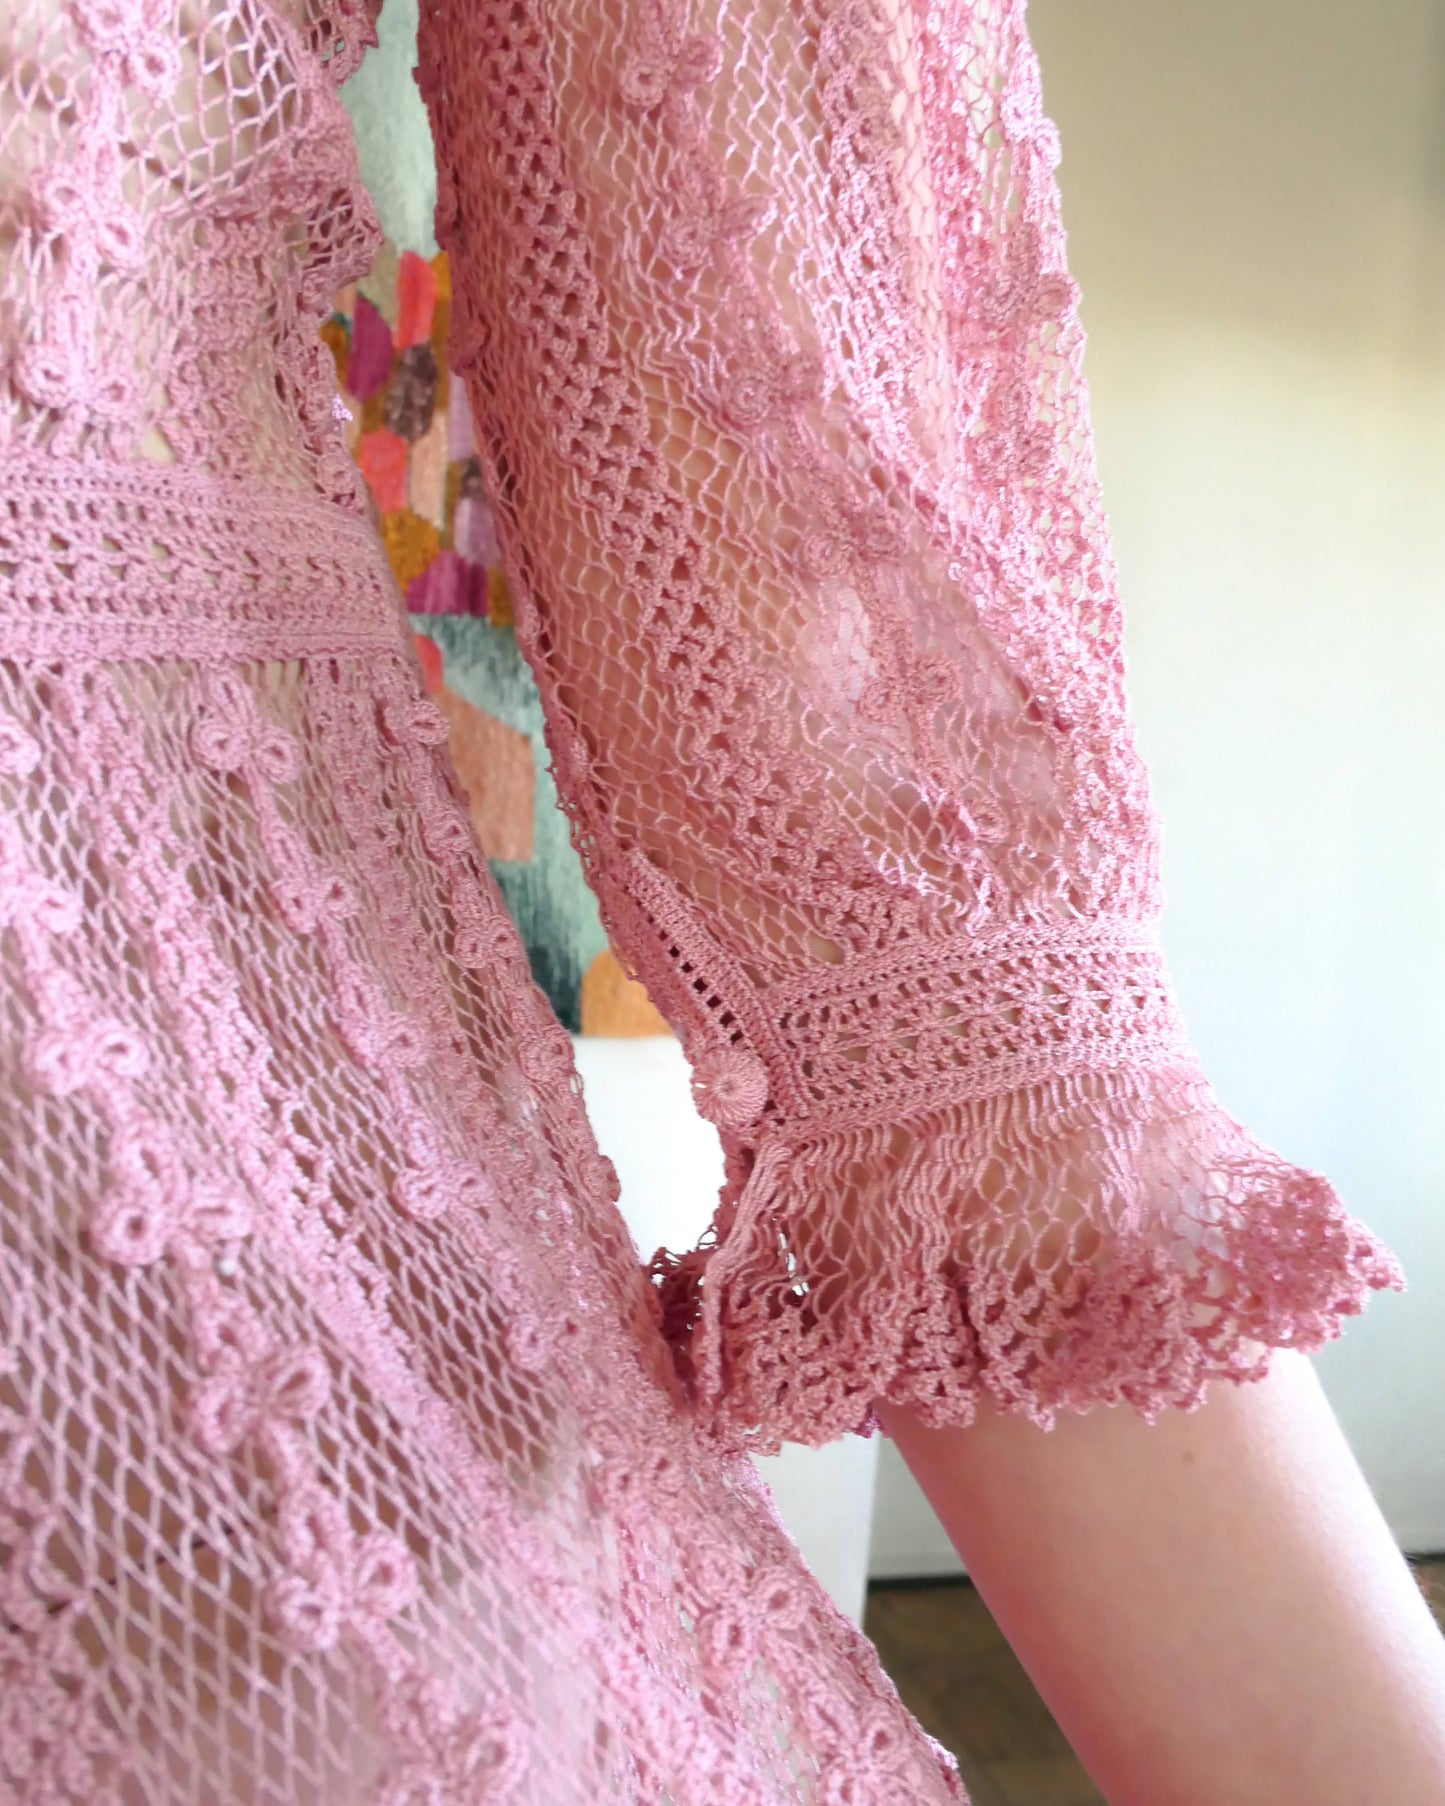 Closeup of ruffled sleeve with button.  One of our original Lim's crochet maxi dresses in a muted rose color from the 1980's. A darling of a piece and sure to turn heads, this dress was intricately hand crocheted using very fine cotton threads.   3/4 length sleeves, round collar, with ruffles at the wrist.  Model is wearing a natural colored slip underneath. 